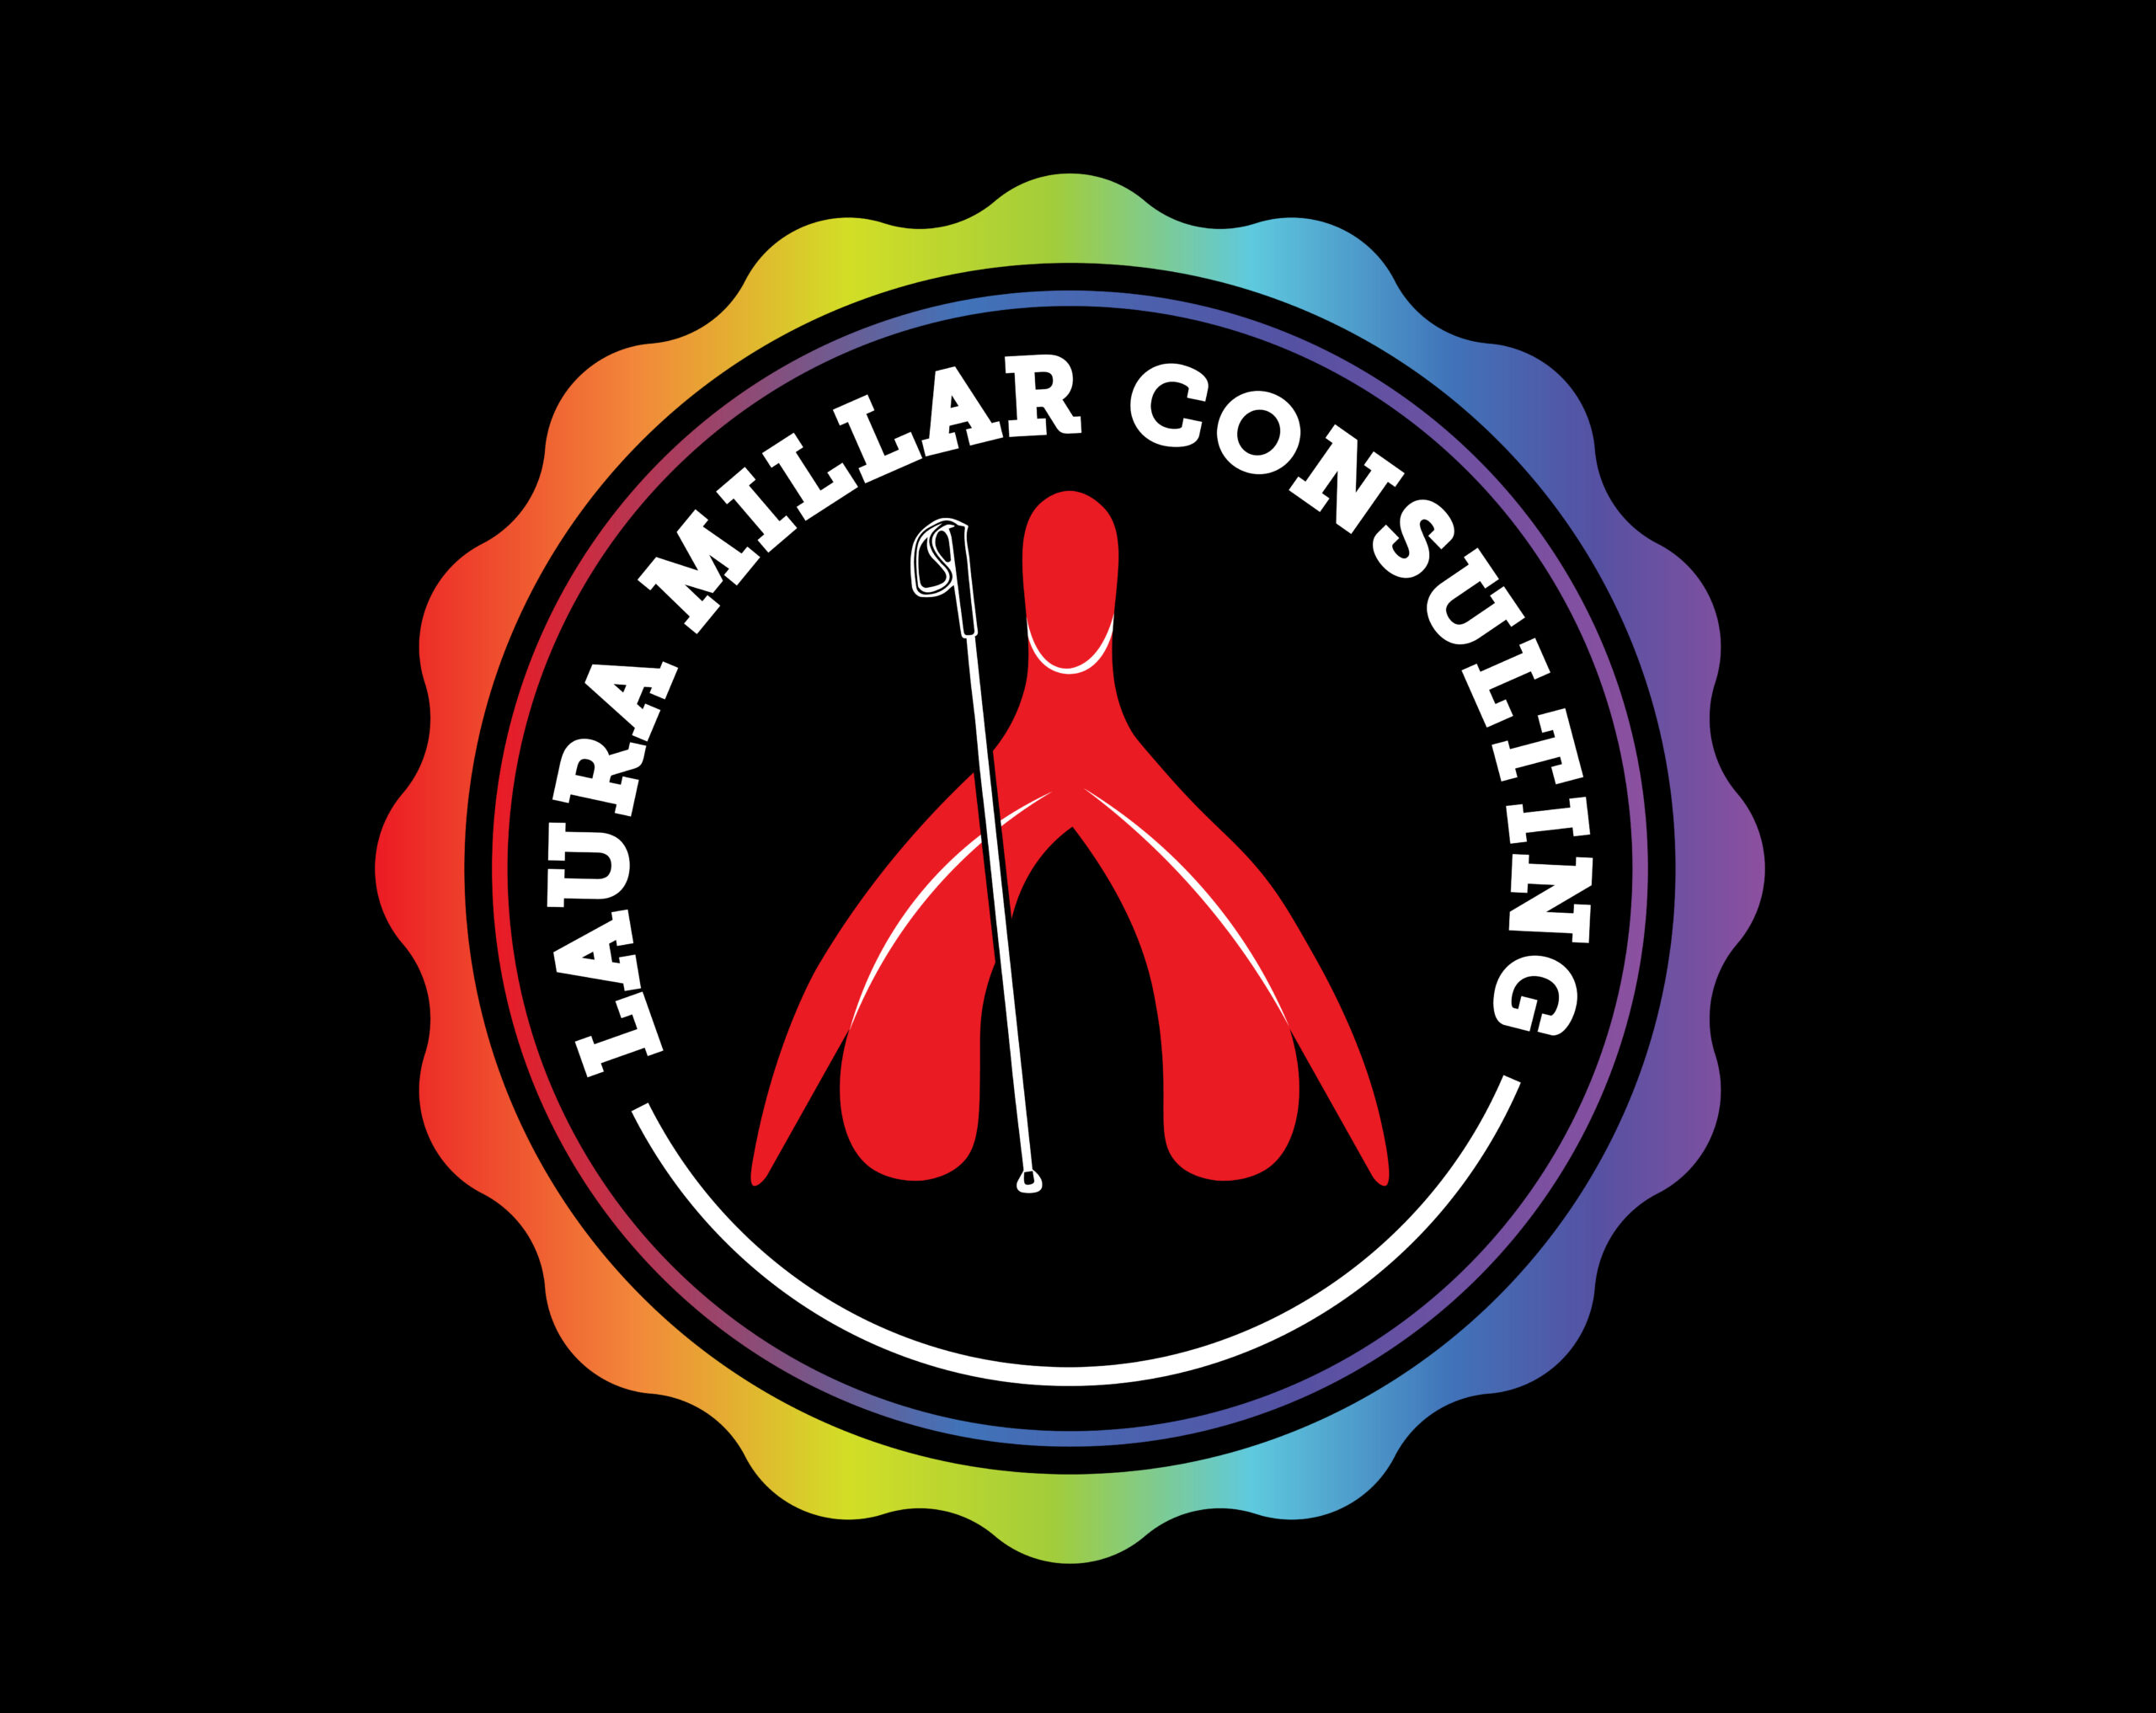 Circular logo for 'Laura Millar Consulting' on a black background. It includes a wavy rainbow border, white capital text at the top edge, and a red anatomically correct clitoris holding a long white cane for the blind is depicted in the center. To learn more about the appearance of an anatomically correct clitoris and why it serves as my logo, please see my FAQ page!